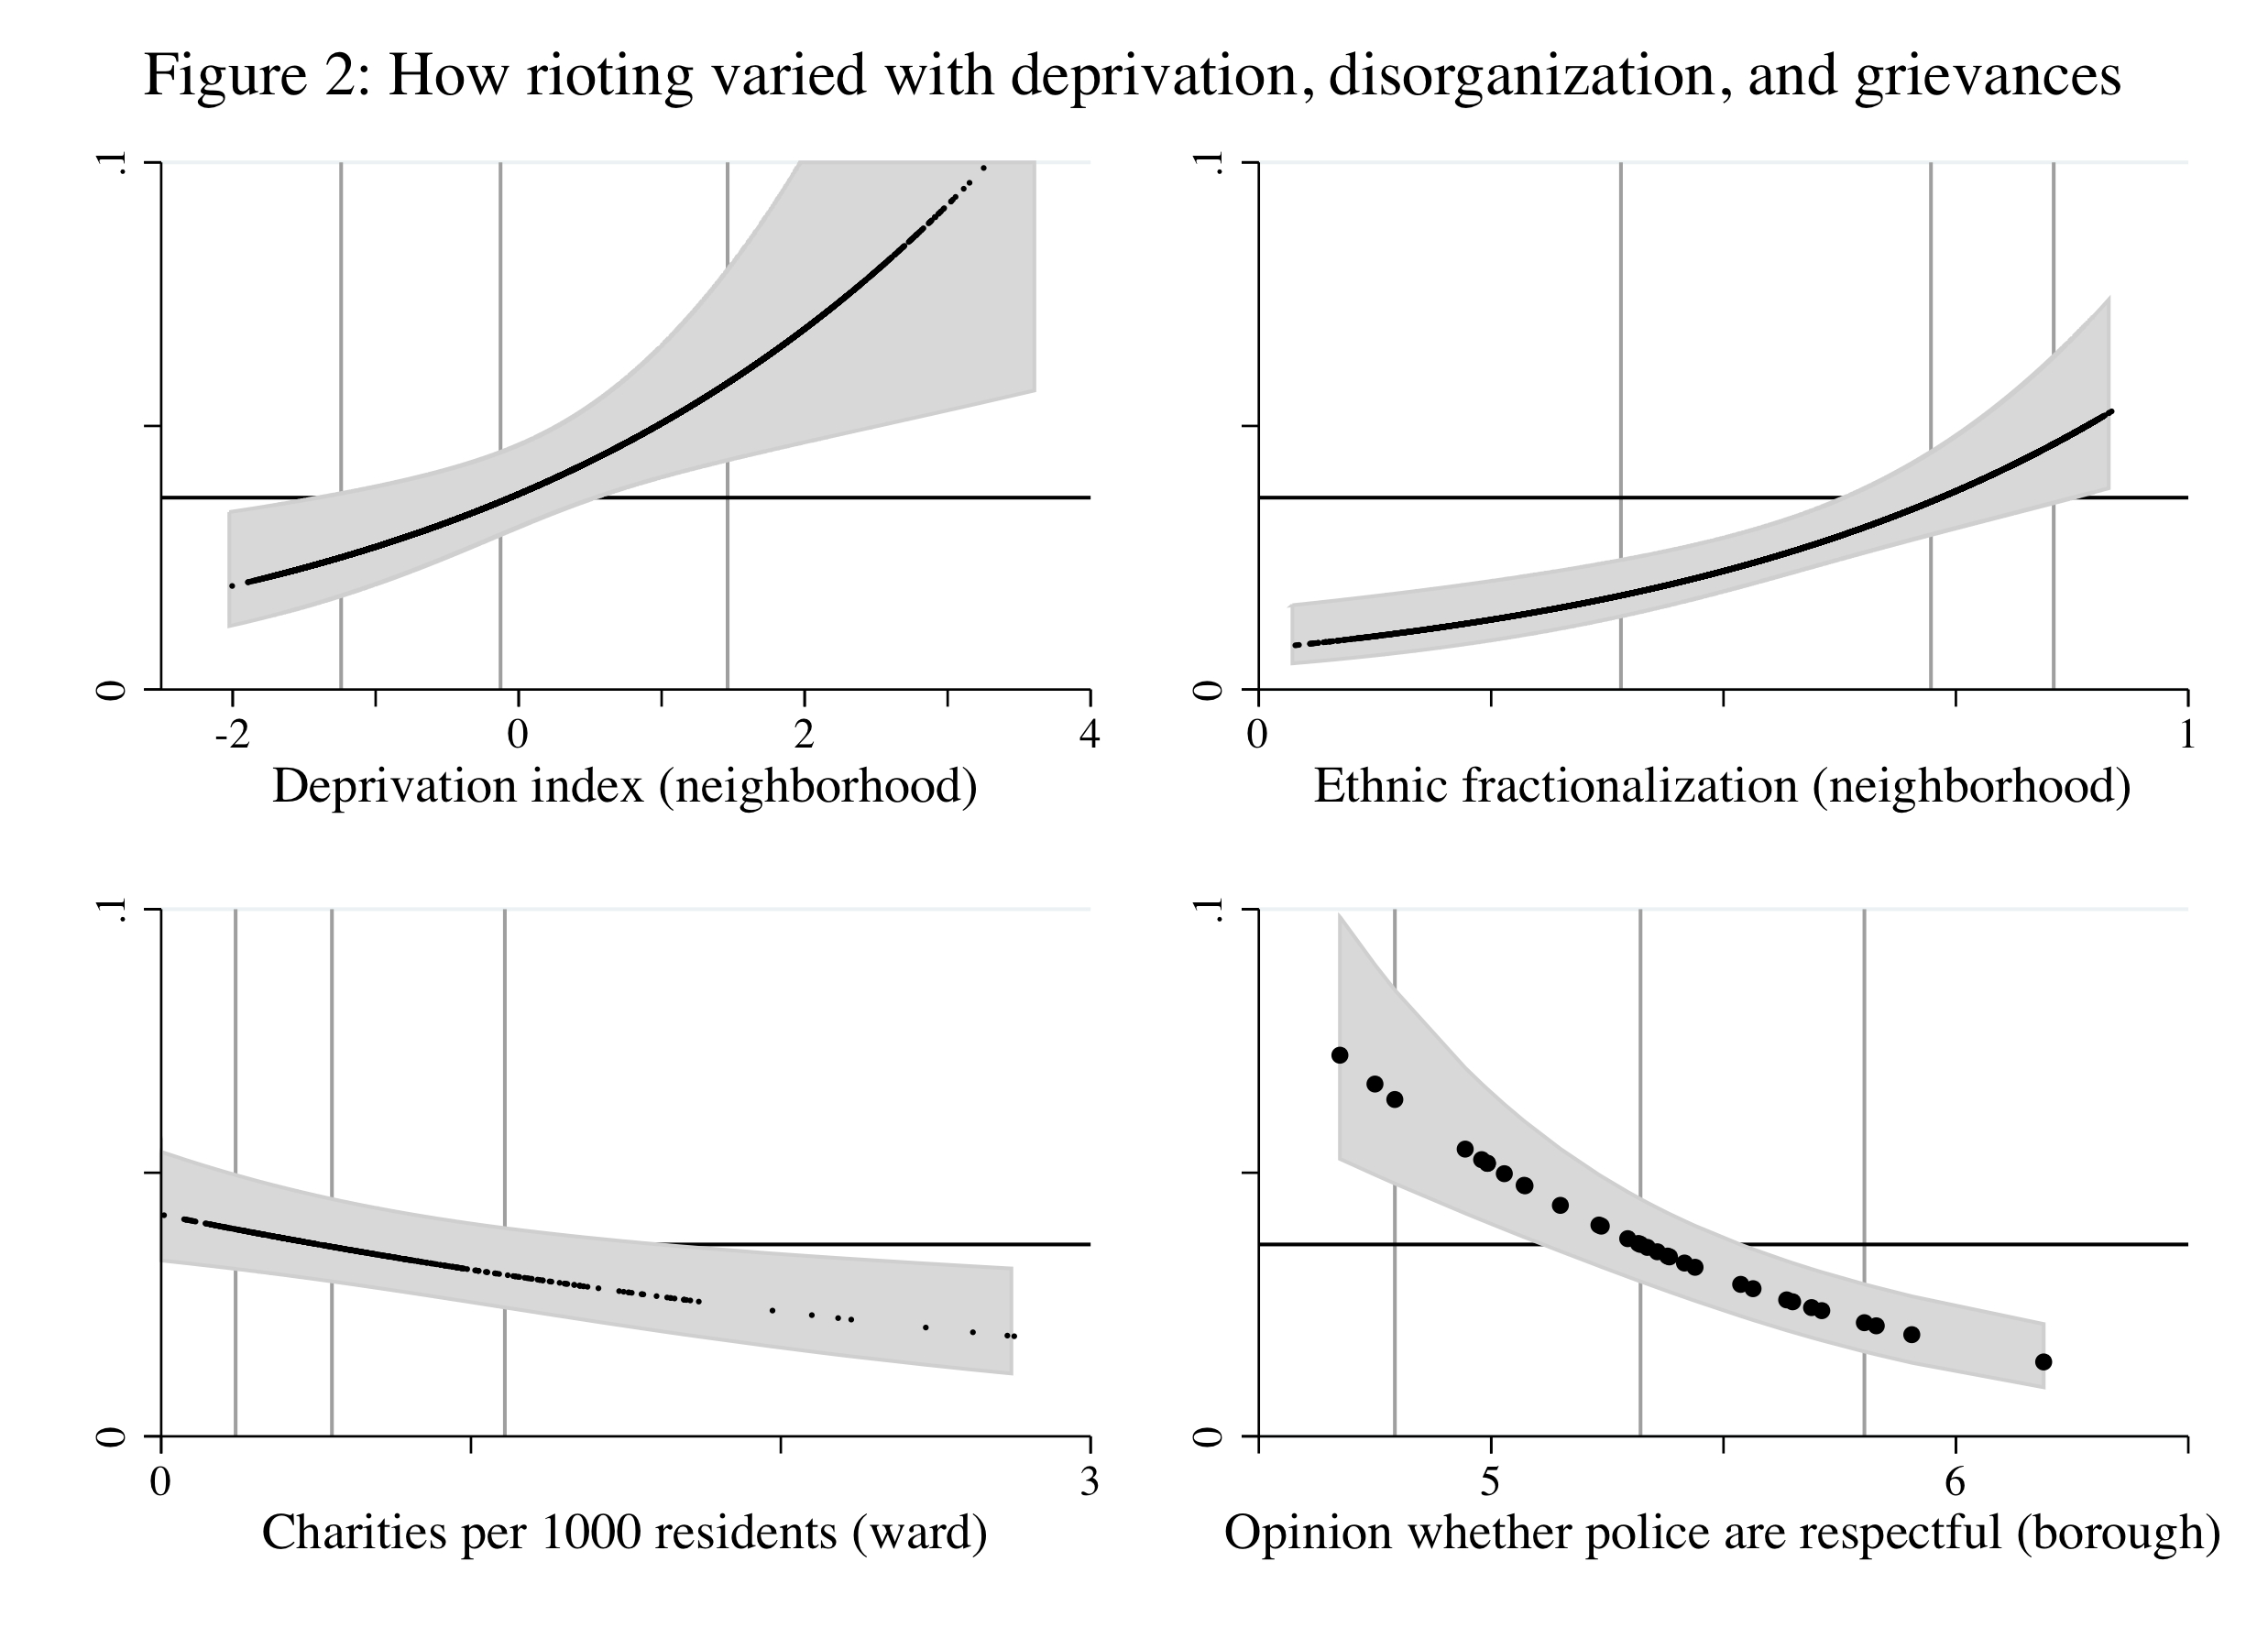 How rioting varied with deprivation, disorganization, and grievances